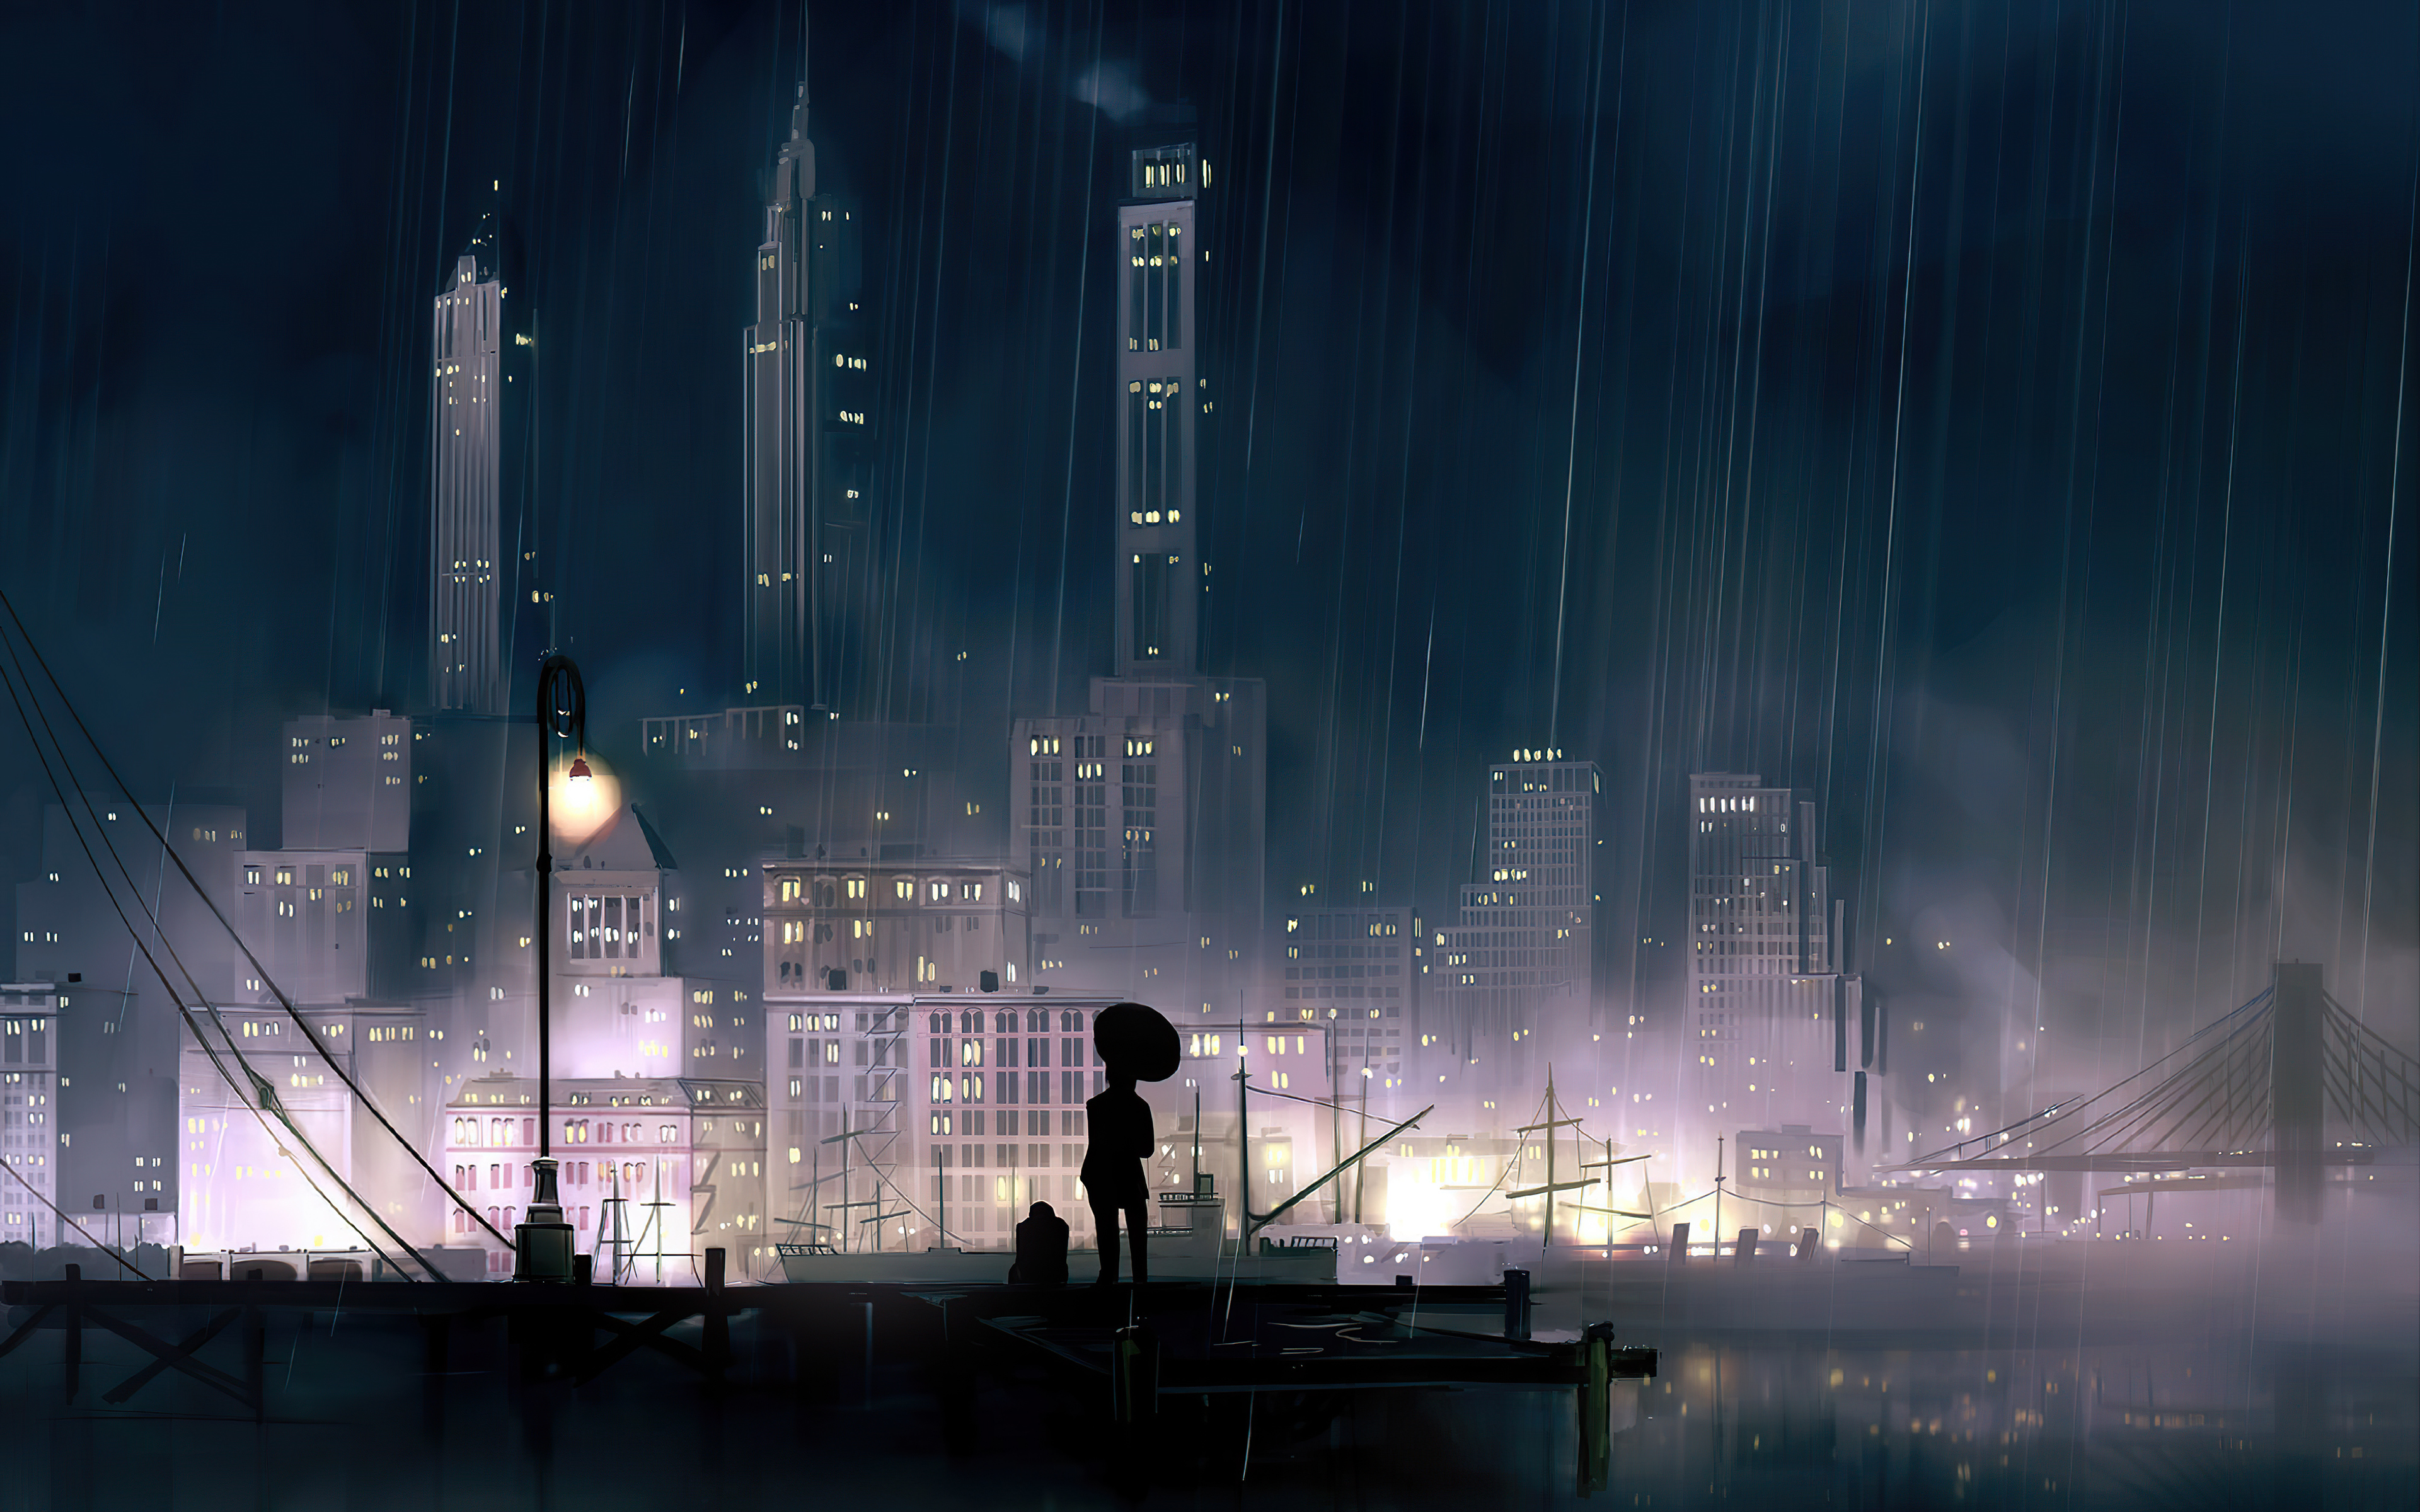 100+] Aesthetic Anime City Backgrounds | Wallpapers.com